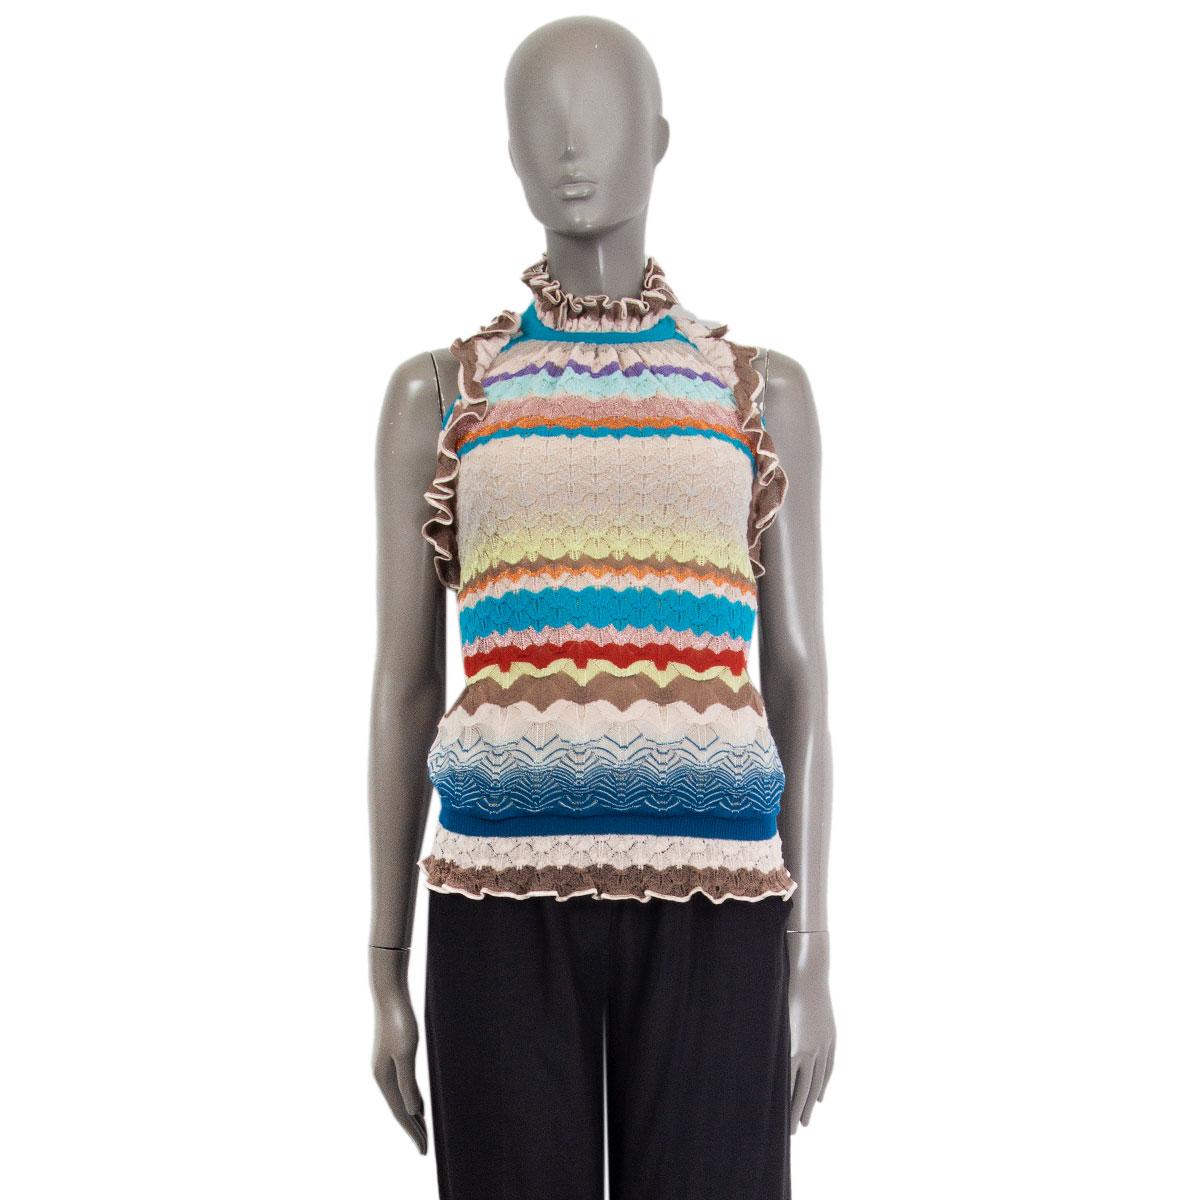 100% authentic Missoni ruched halter-neck top in nude, brown, burgundy, rose lurex, turquoise, lime and navy knitted signature Missoni chevron fabric (missing content tag). Lind at the front side in nude silk (100%). Closes with four buttons on the